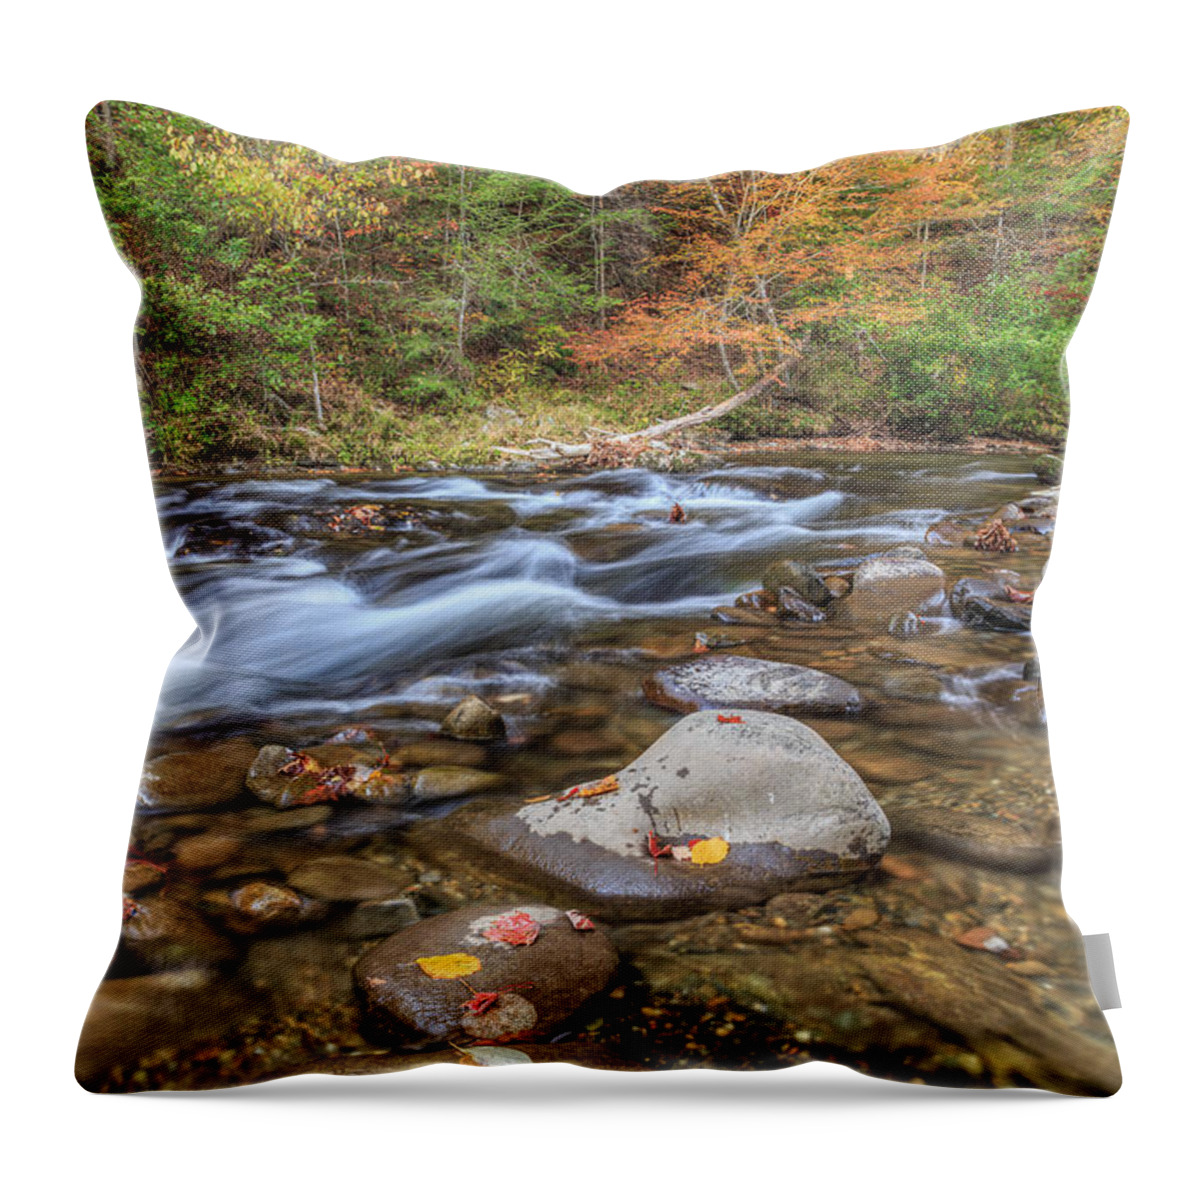 Smoky Mountain Natinal Park Throw Pillow featuring the photograph Fall Colors Little River by Paul Schultz